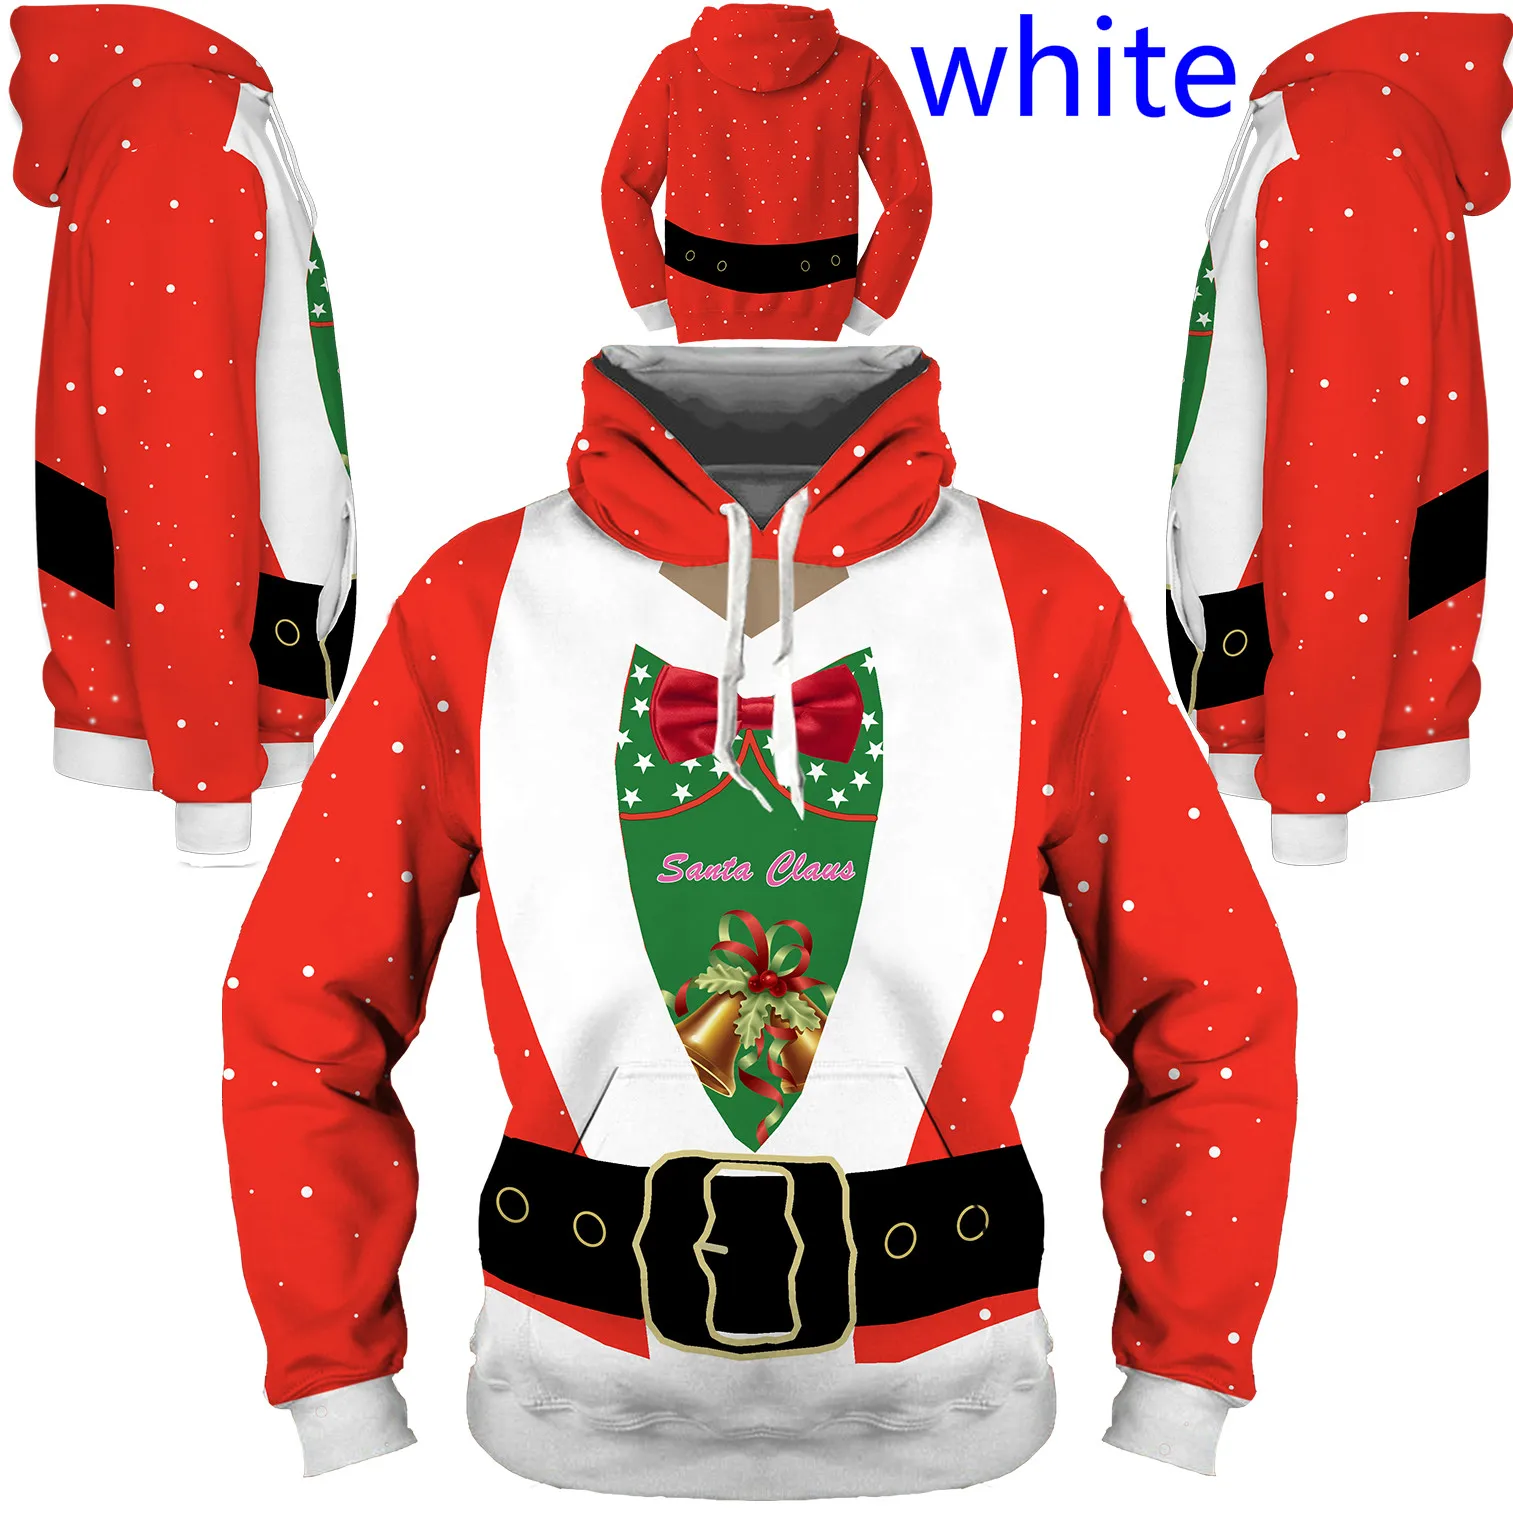 Newest Fashion Christmas 3d Hoodie Funny Santa Claus Printed Cosplay Sweatshirt Casual Pullover